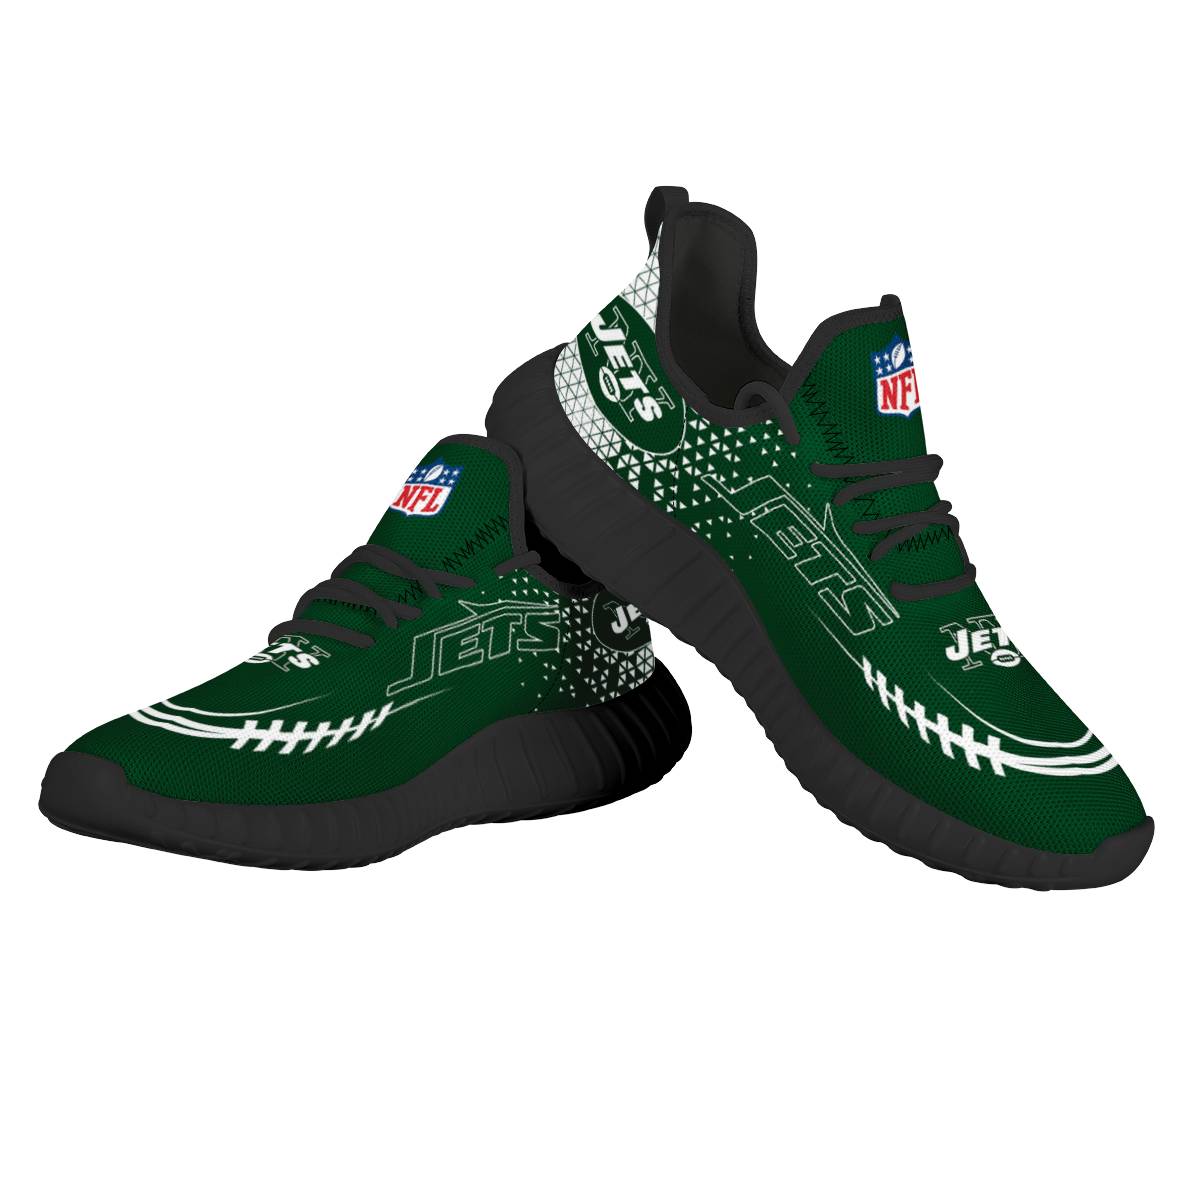 Women's NFL New York Jets Mesh Knit Sneakers/Shoes 001